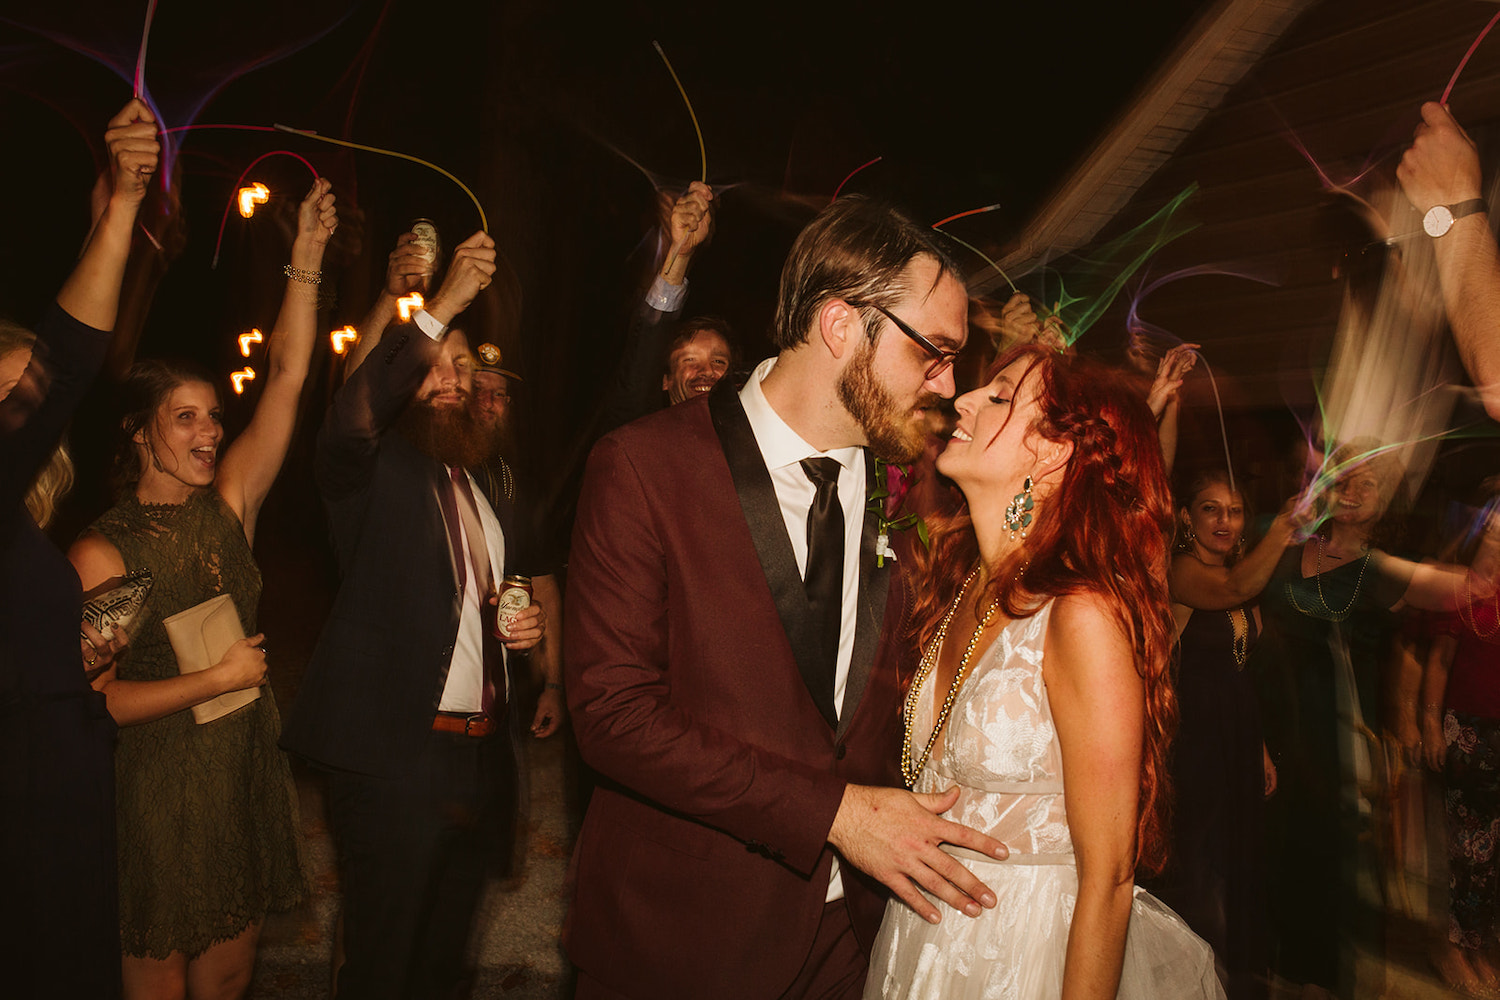 groom and bride start to kiss while wedding guests wave glow sticks around them